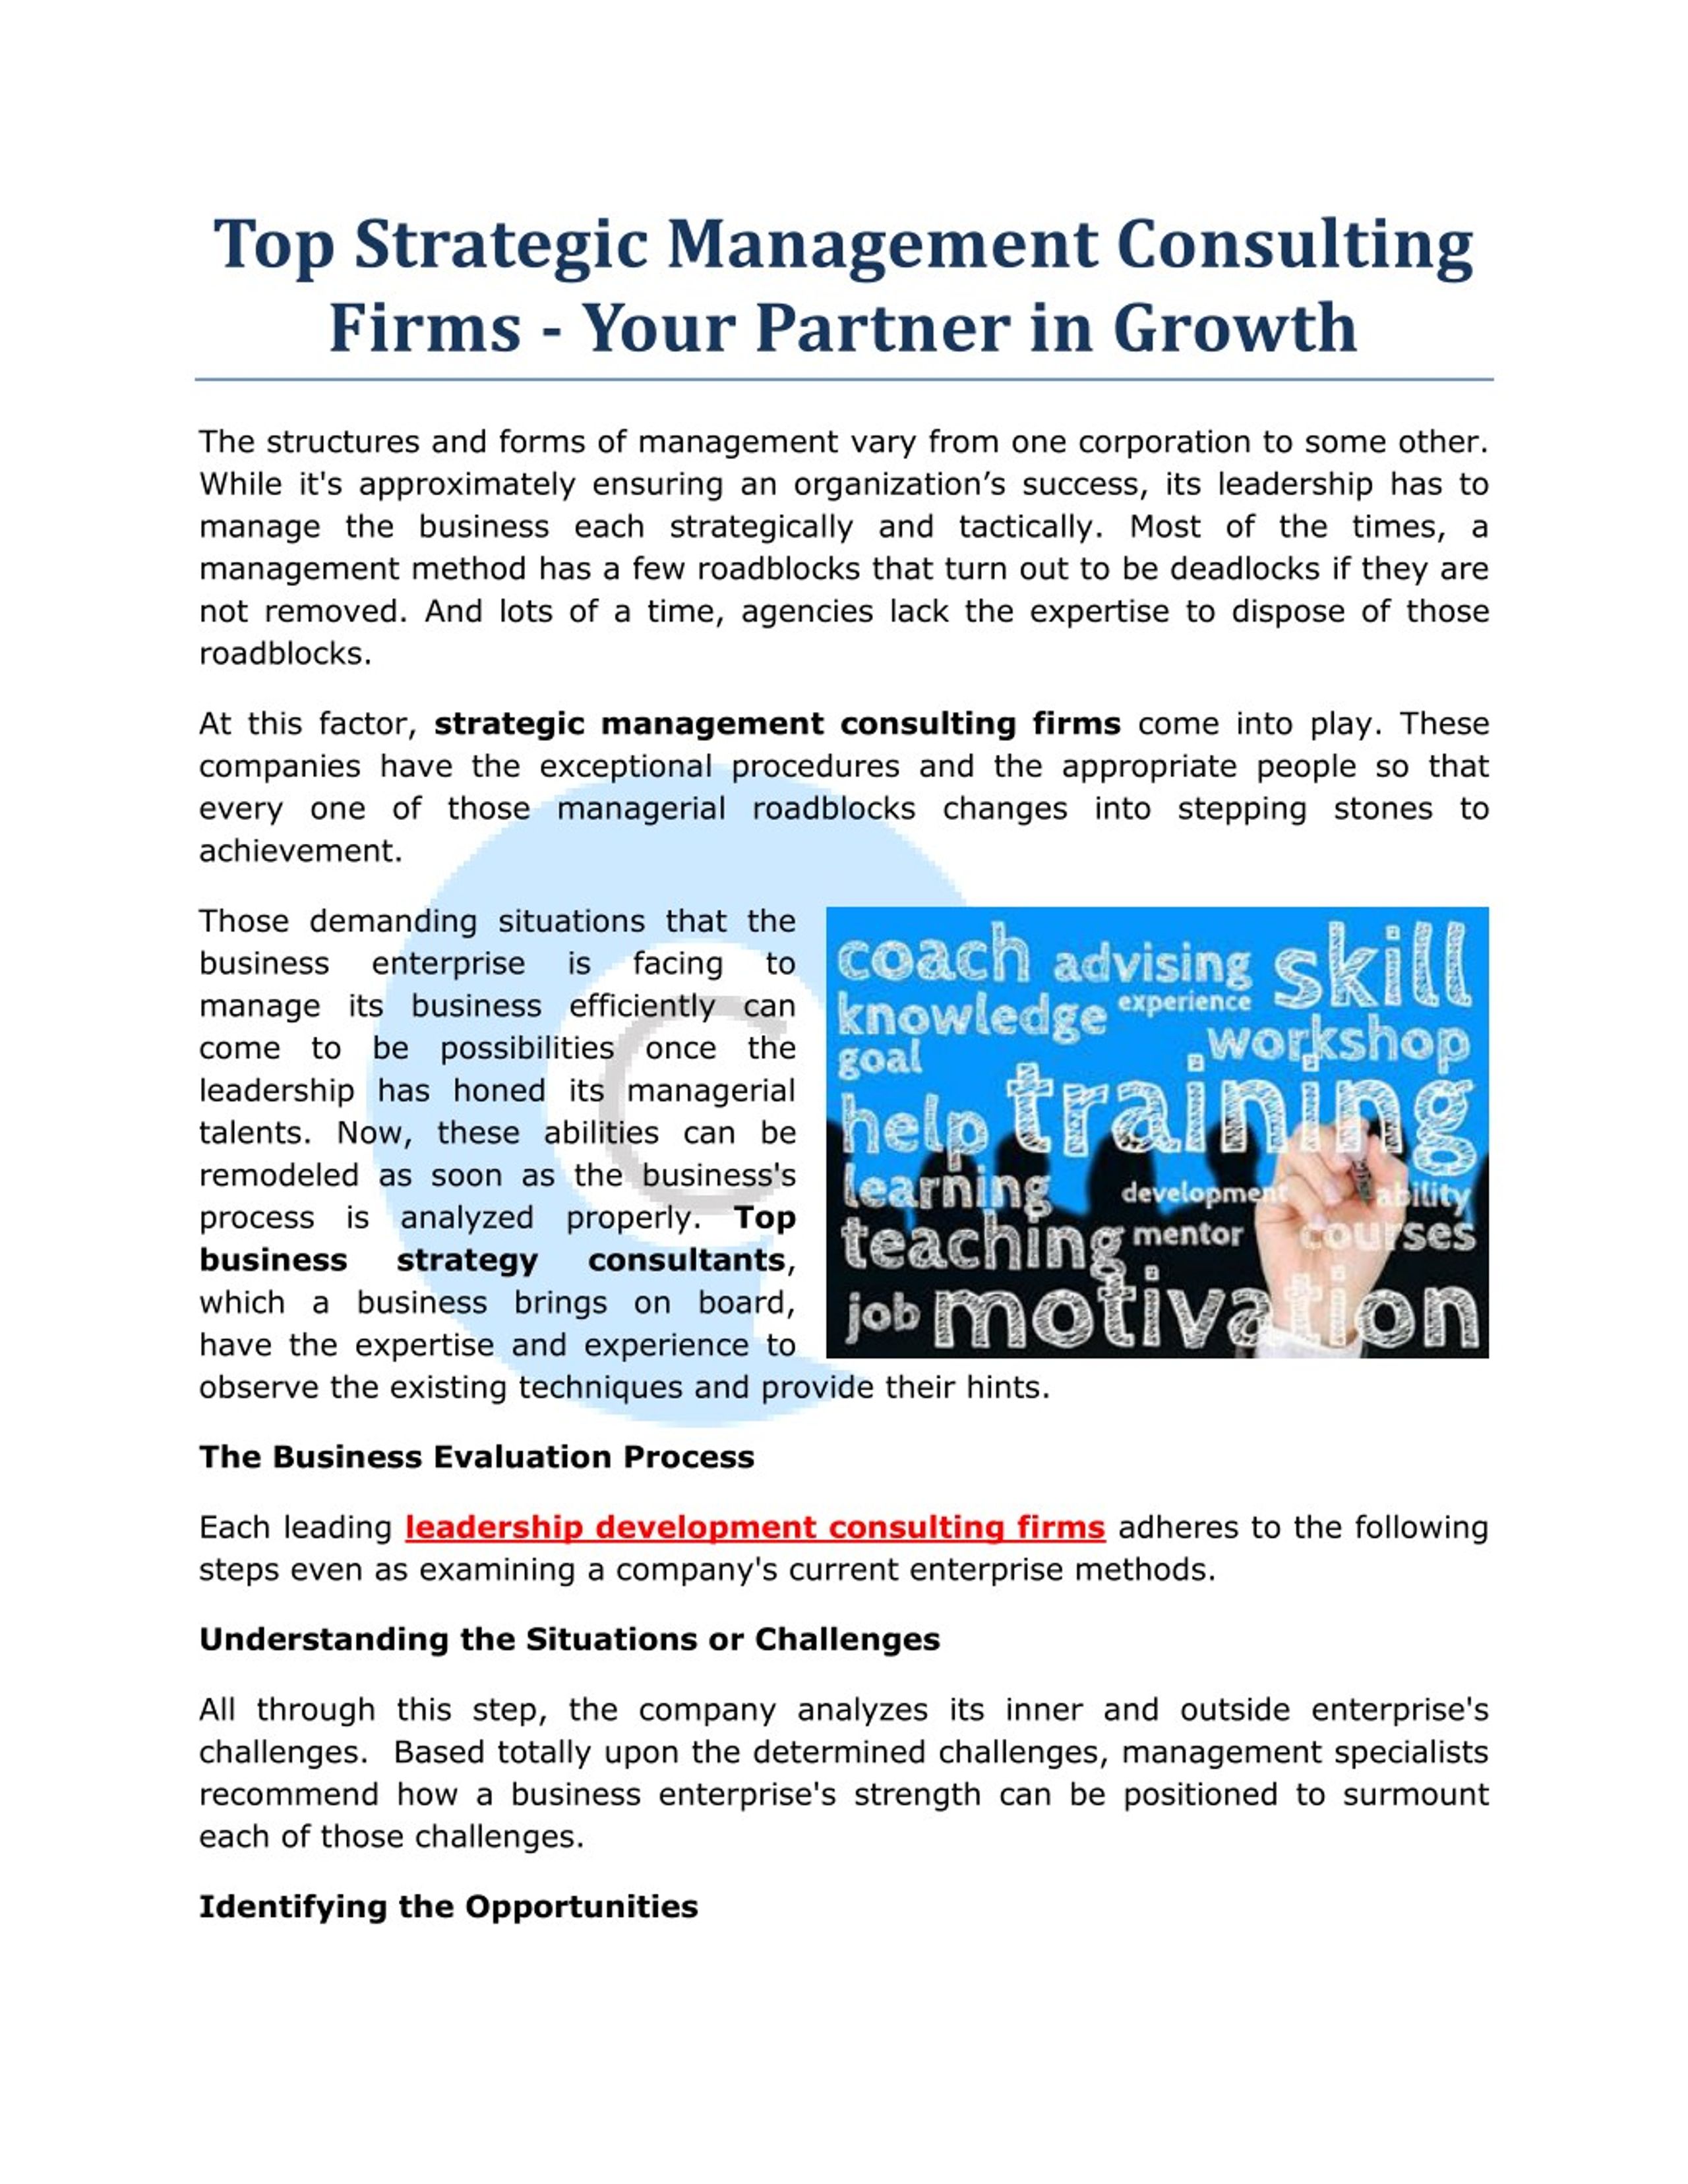 PPT - Top Strategic Management Consulting Firms - Your Partner in Growth  PowerPoint Presentation - ID:7845746